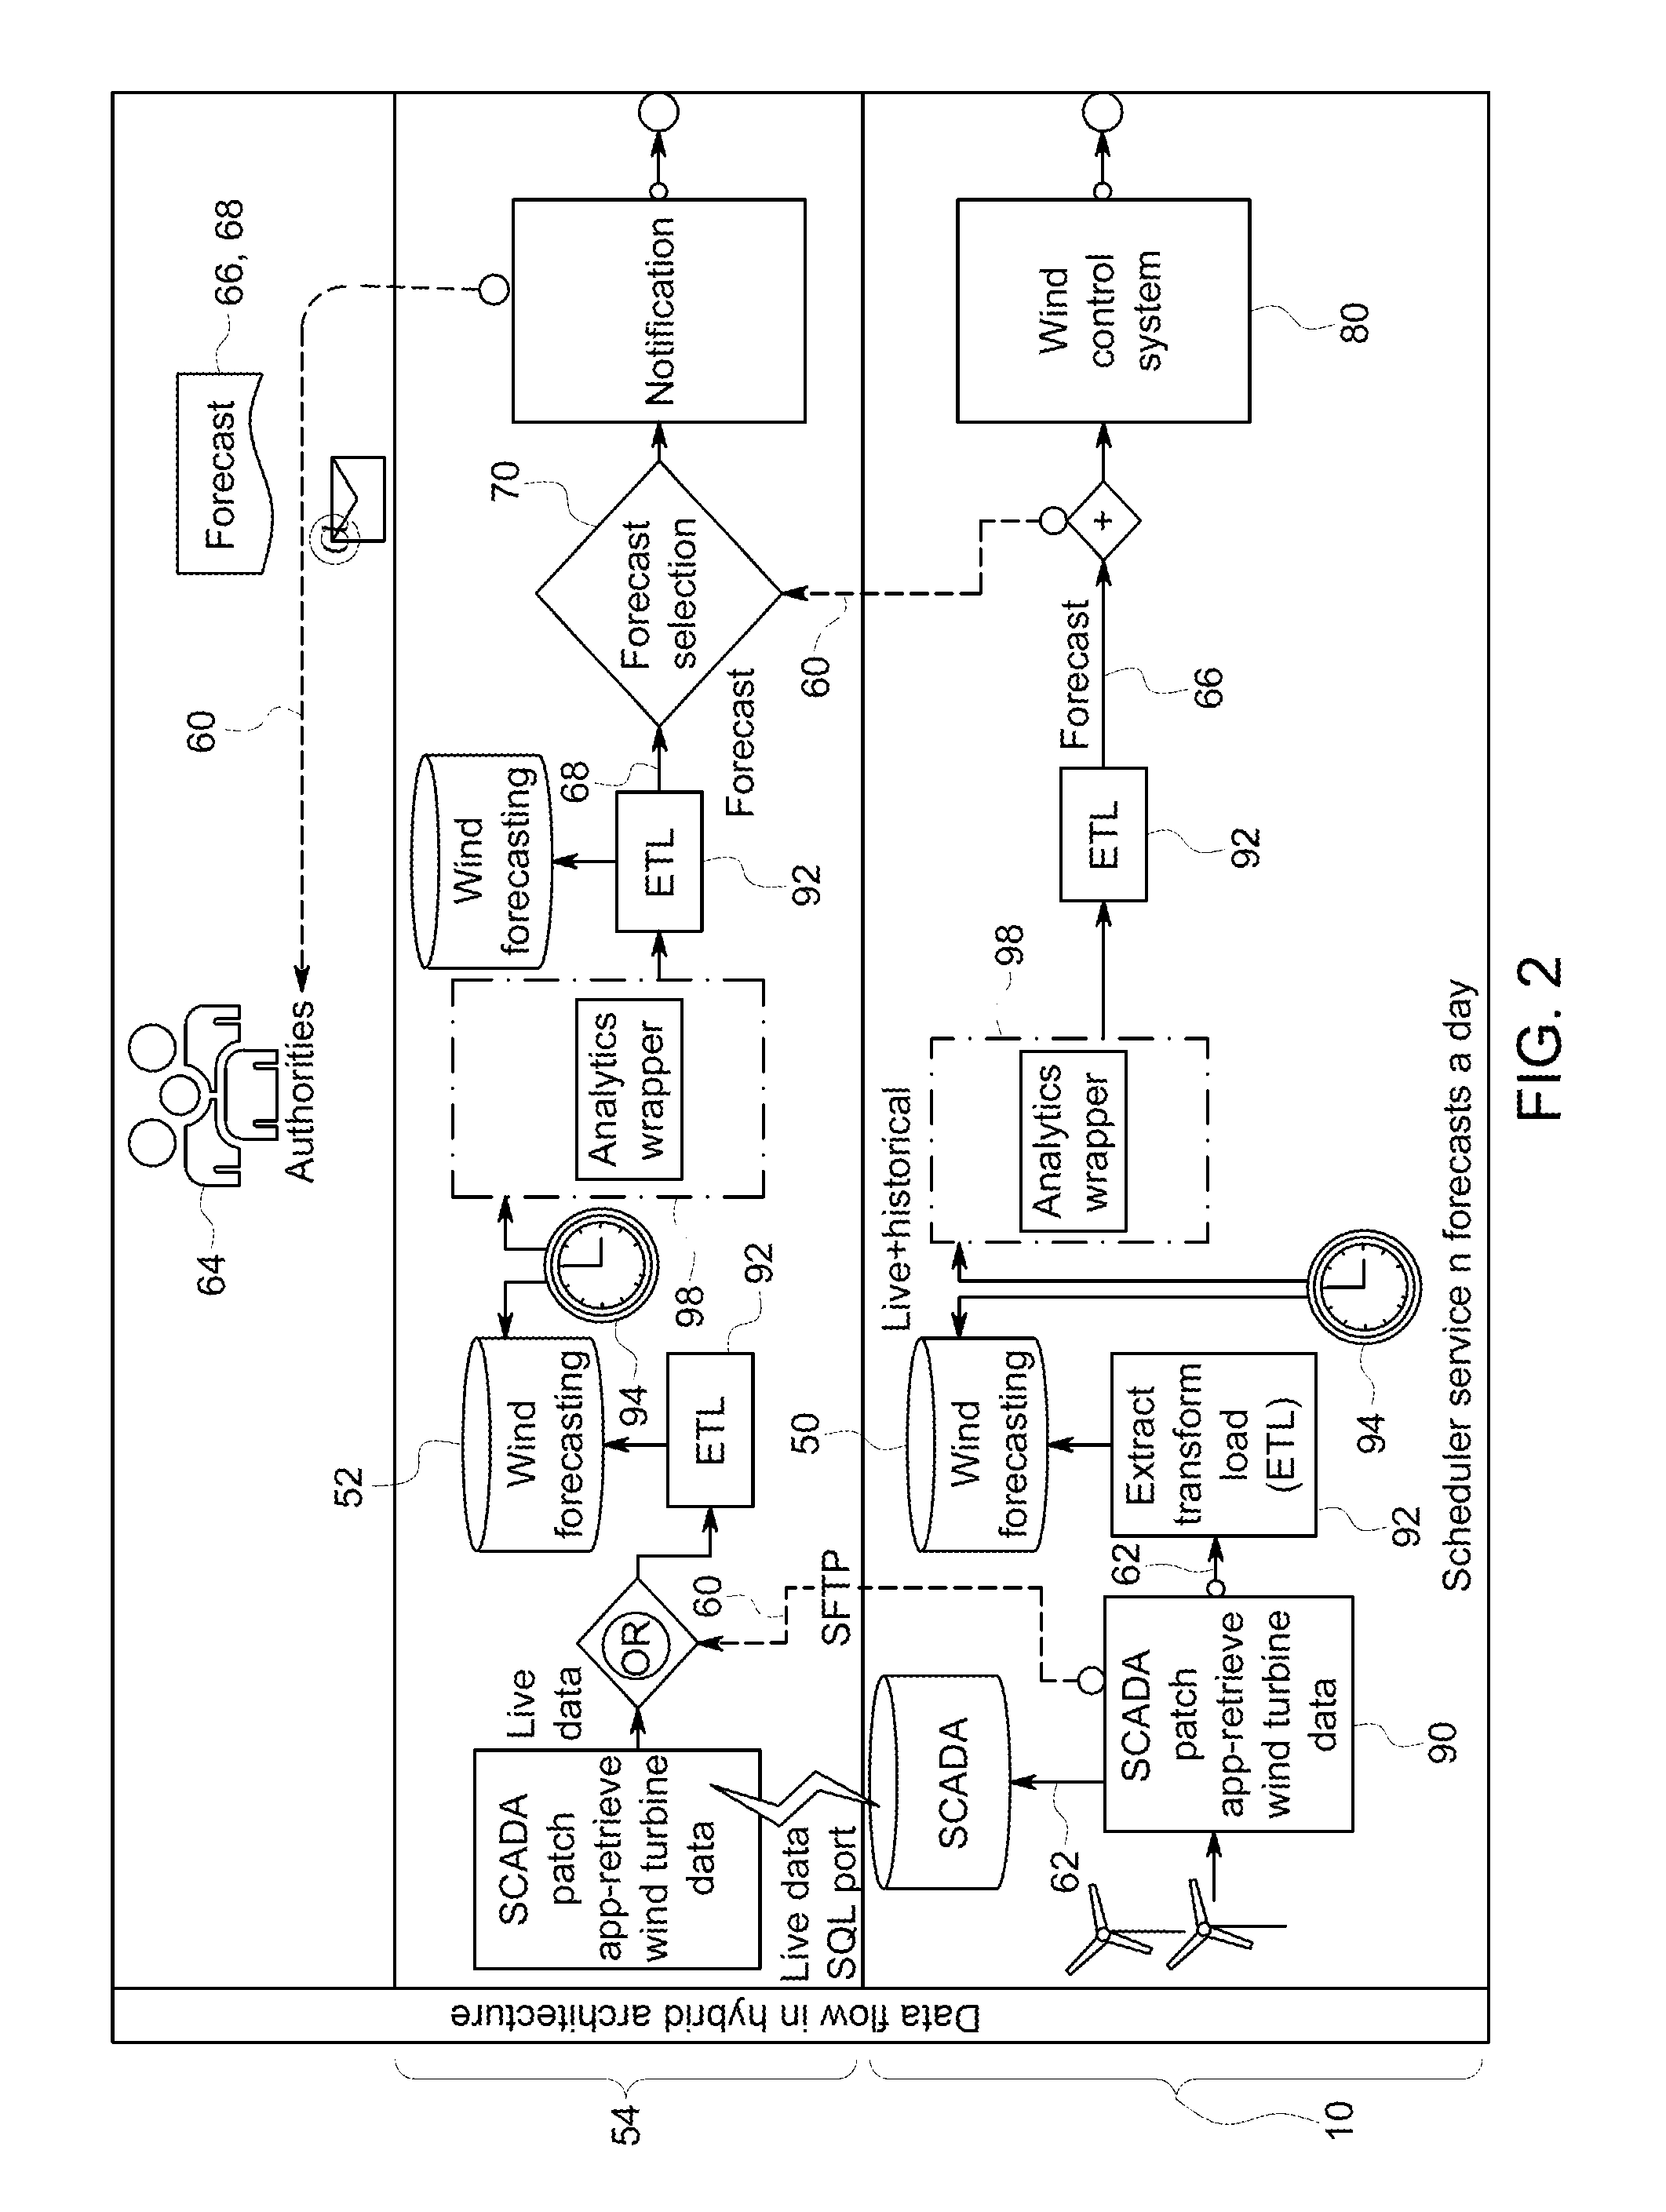 Method and system to optimize availability, transmission, and accuracy of wind power forecasts and schedules